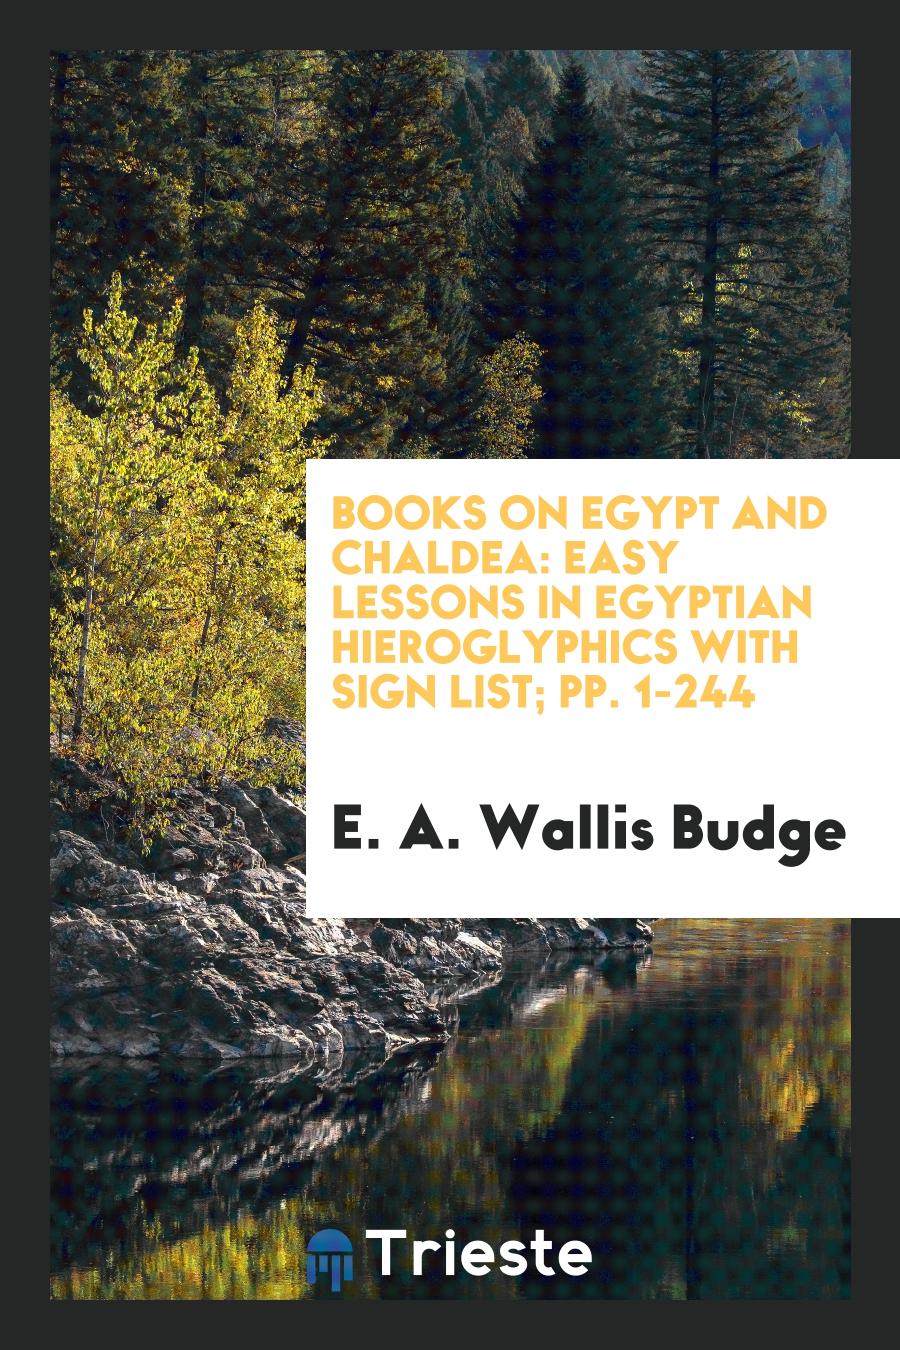 Books on Egypt and Chaldea: Easy Lessons in Egyptian Hieroglyphics with Sign List; pp. 1-244